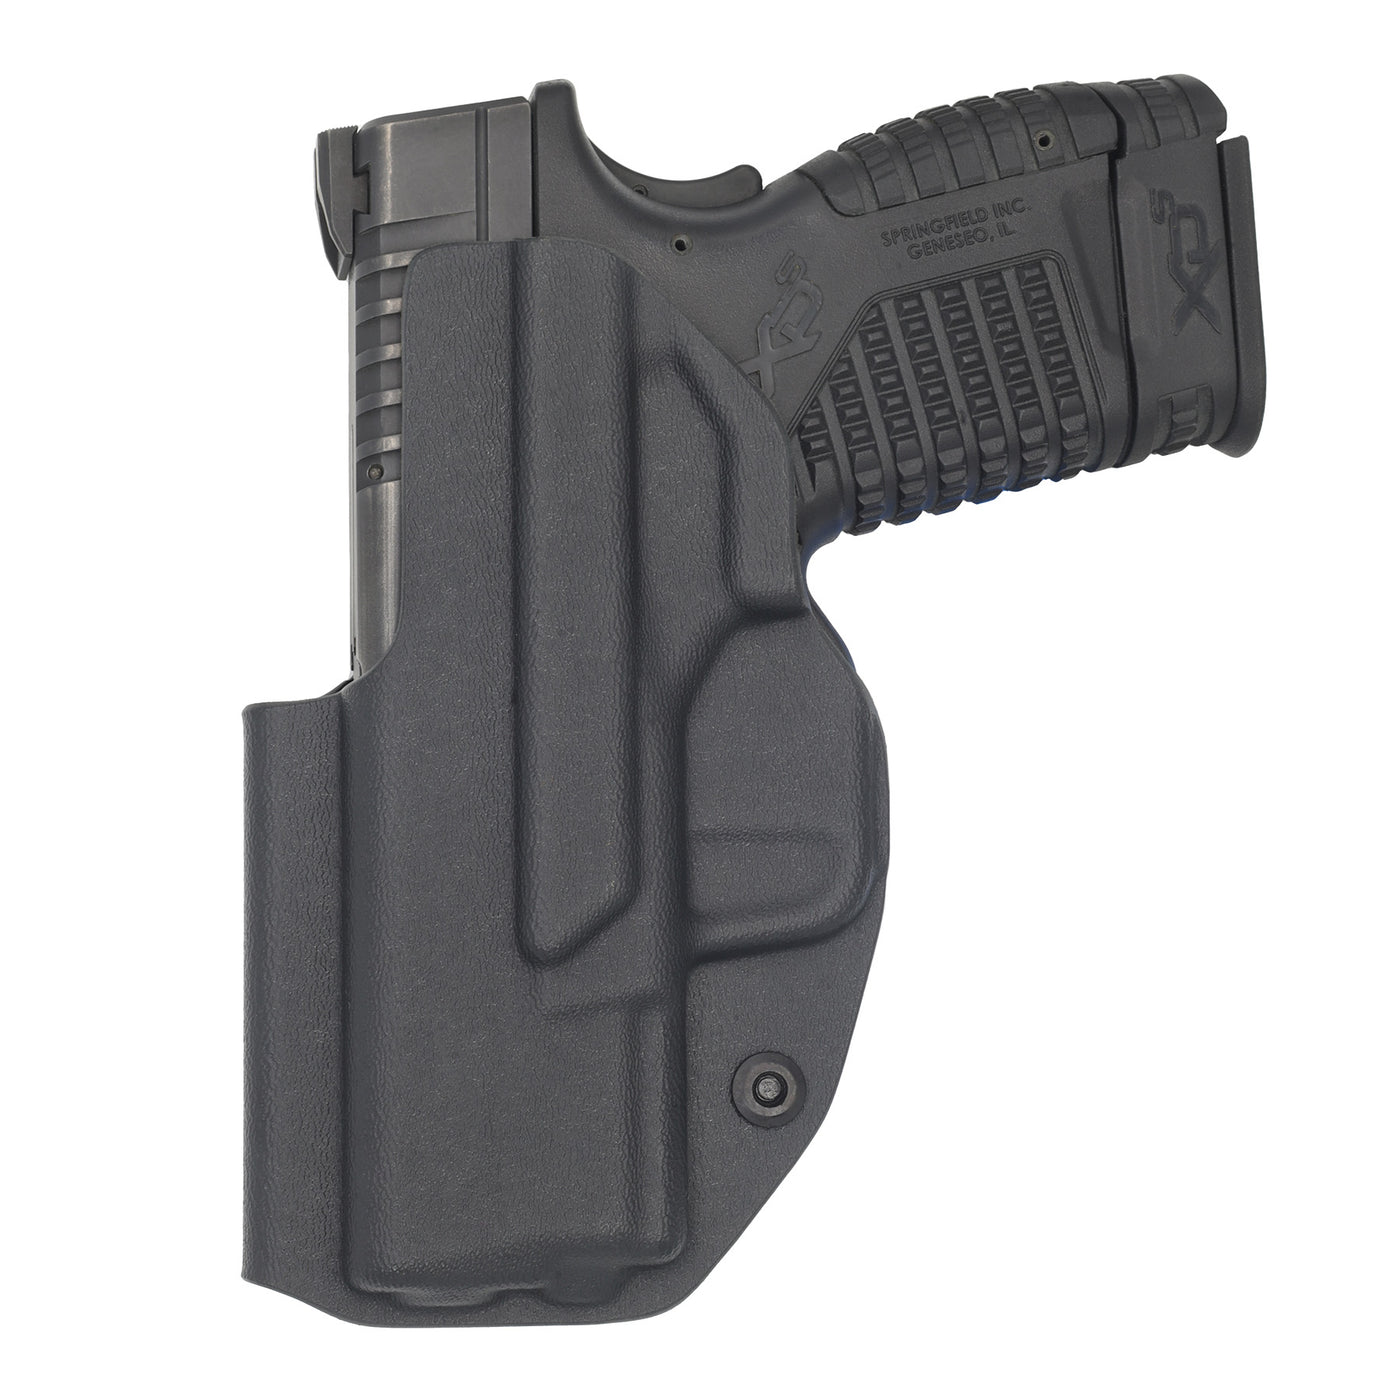 C&G Holsters quick ship Covert IWB kydex holster for Sprindfield XDs 3.3 in black rear view